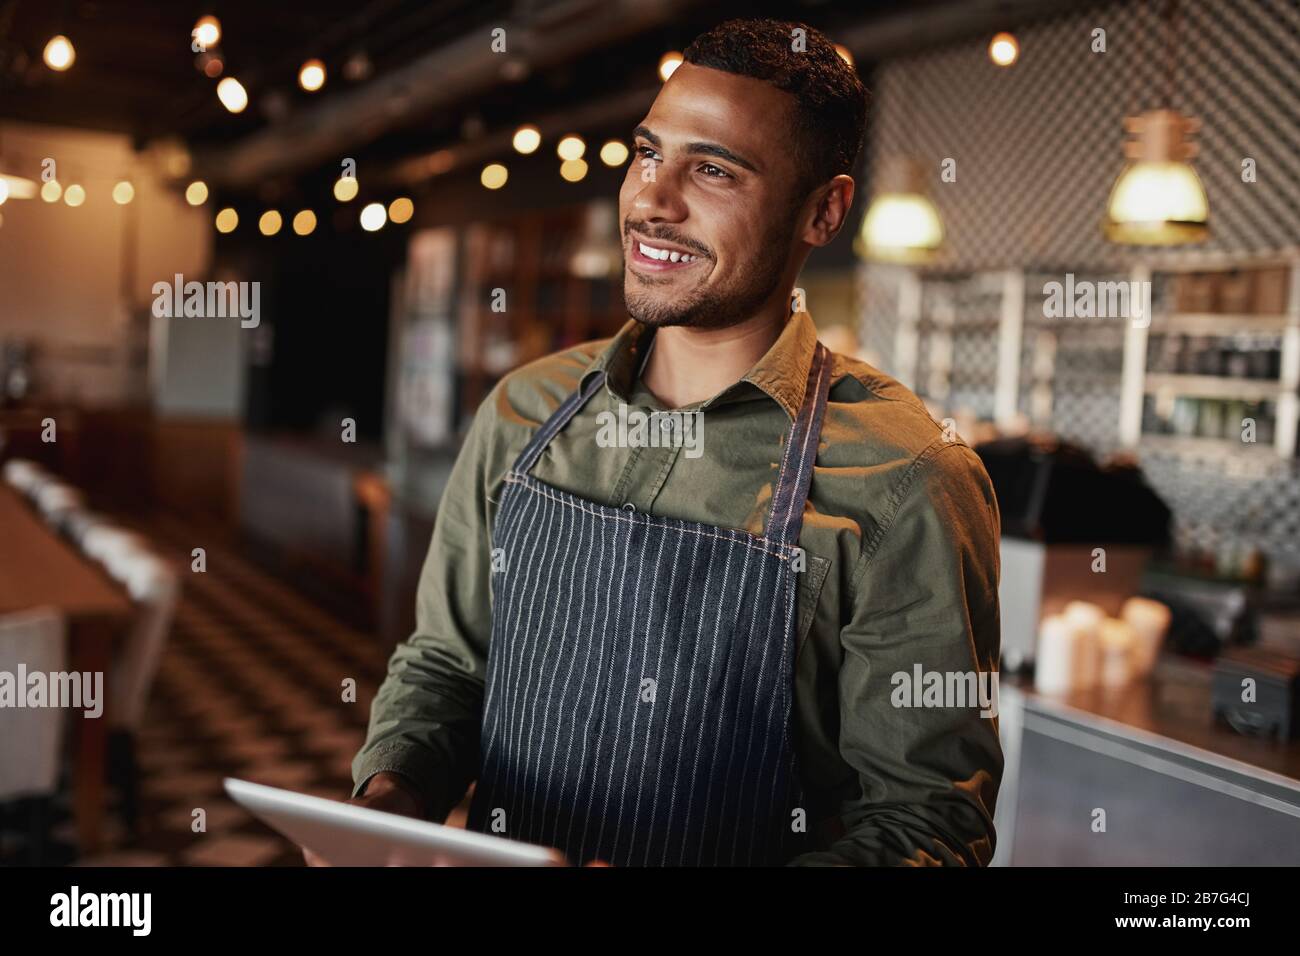 Handsome young man wearing apron holding digital tablet standing in coffee house looking away Stock Photo